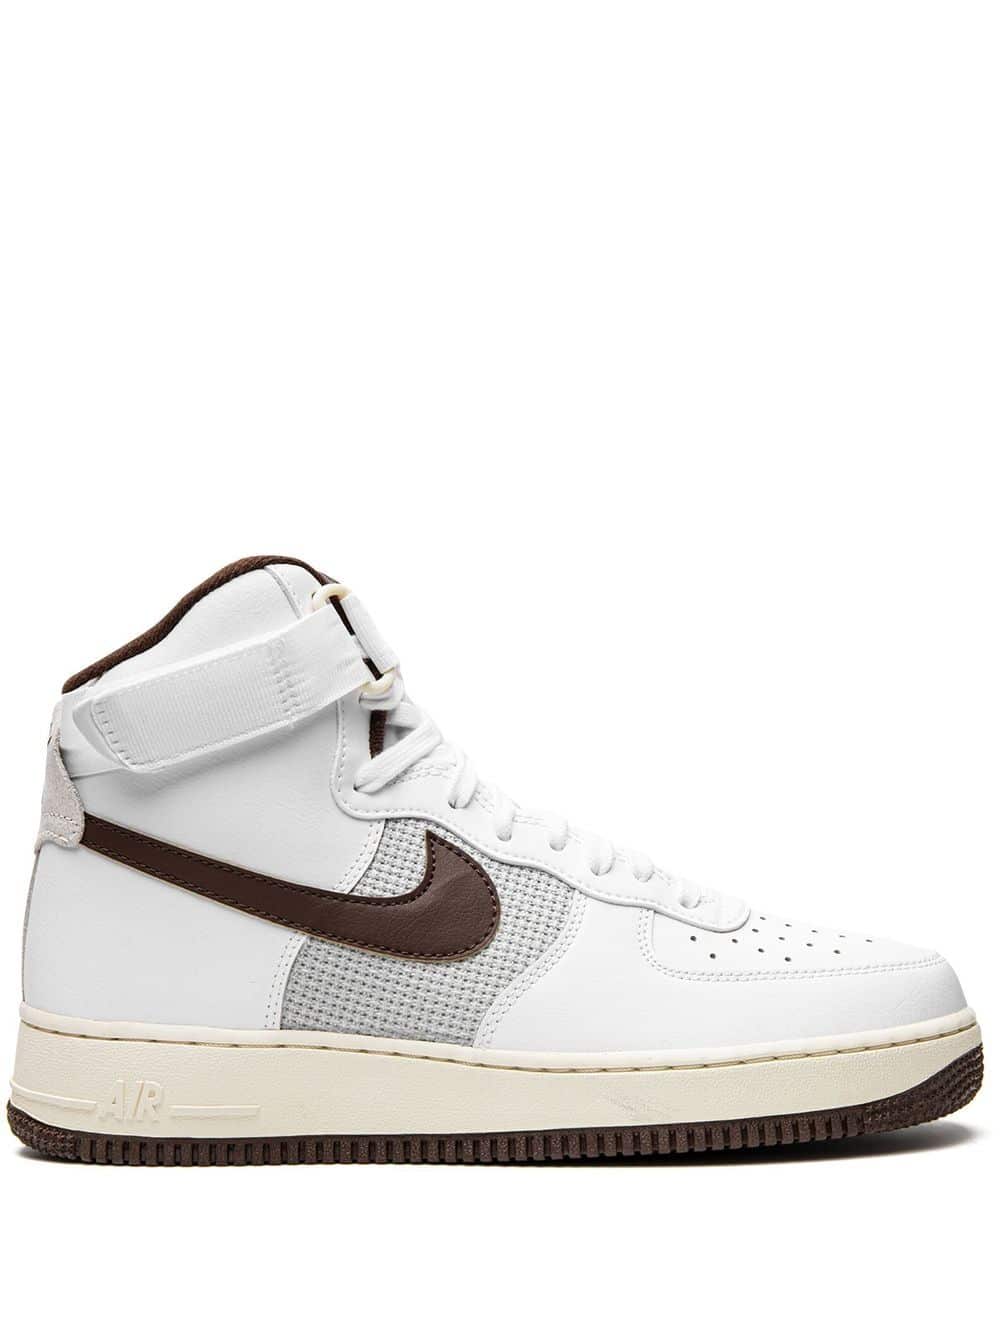 Nike Air Force 1 High '07 LV8 'White Light Chocolate' sneakers - Wit